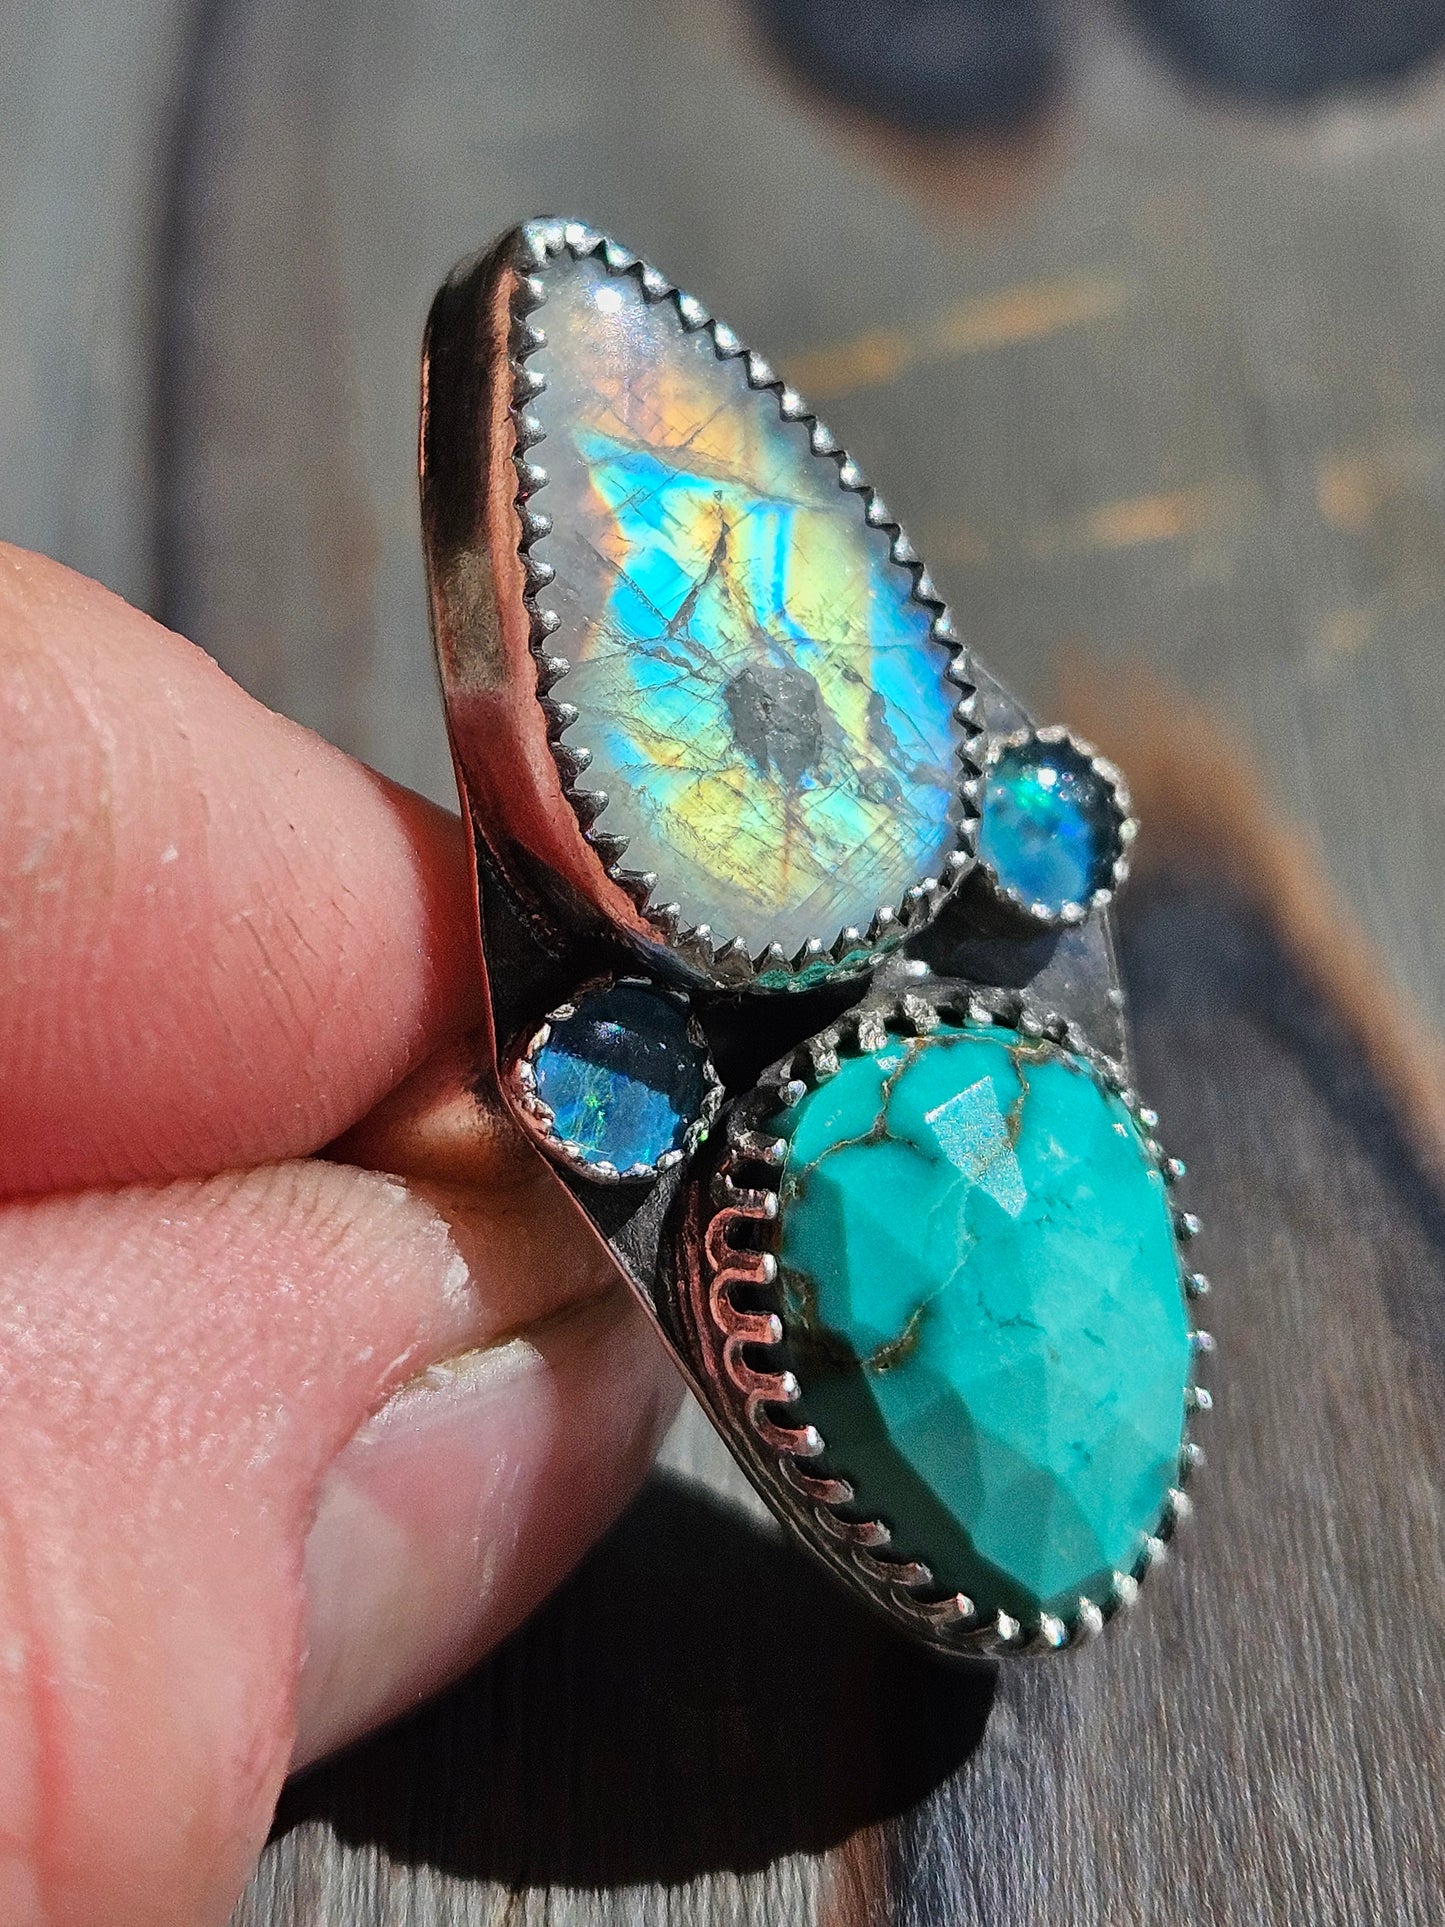 "Pocahontas" Turquoise, Moonstone and Black Opal Ring, Size 8.5